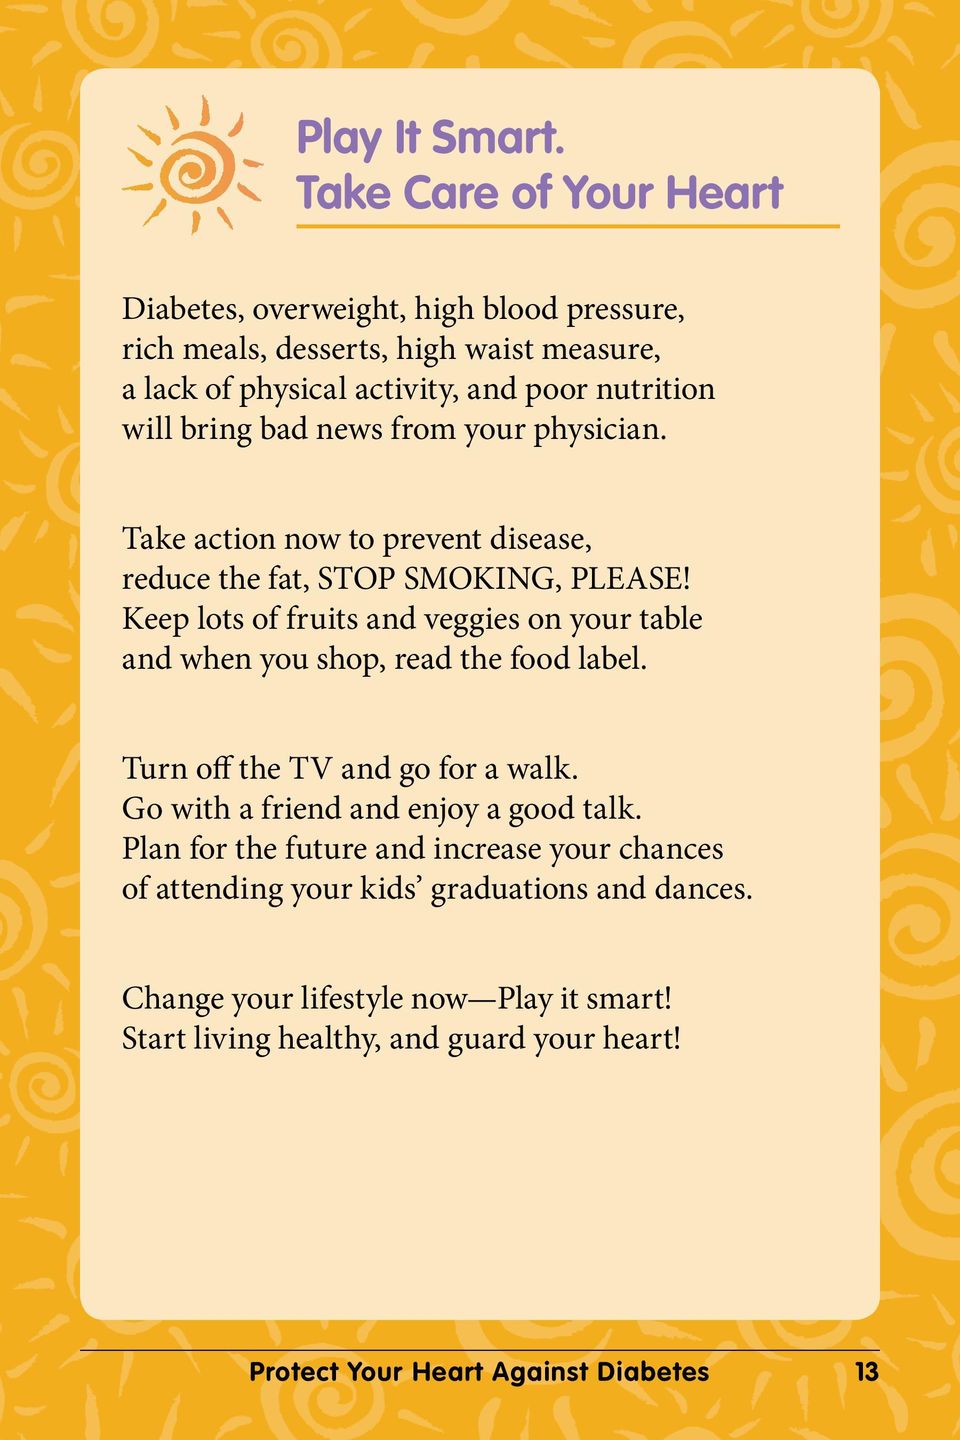 bring bad news from your physician. Take action now to prevent disease, reduce the fat, STOP SMOKING, PLEASE!